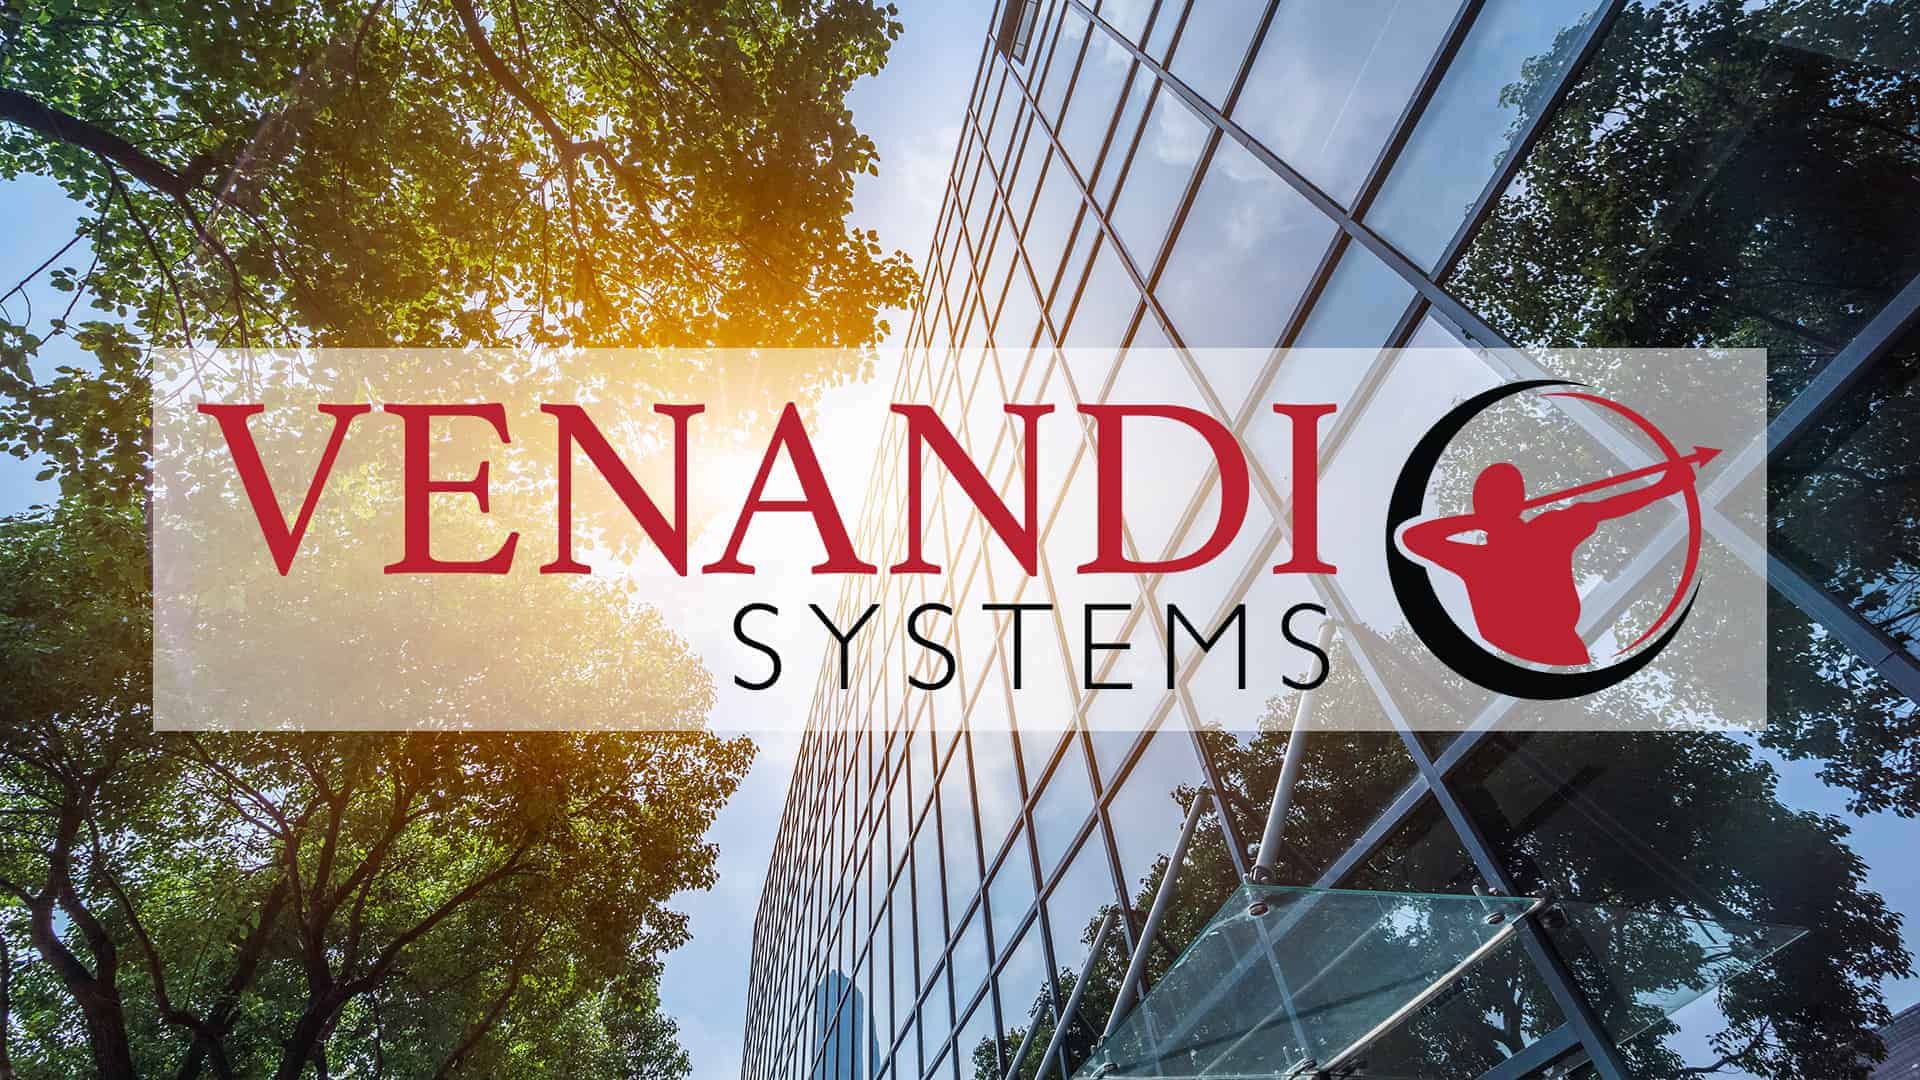 This is a venandi systems logo with a background of building and trees